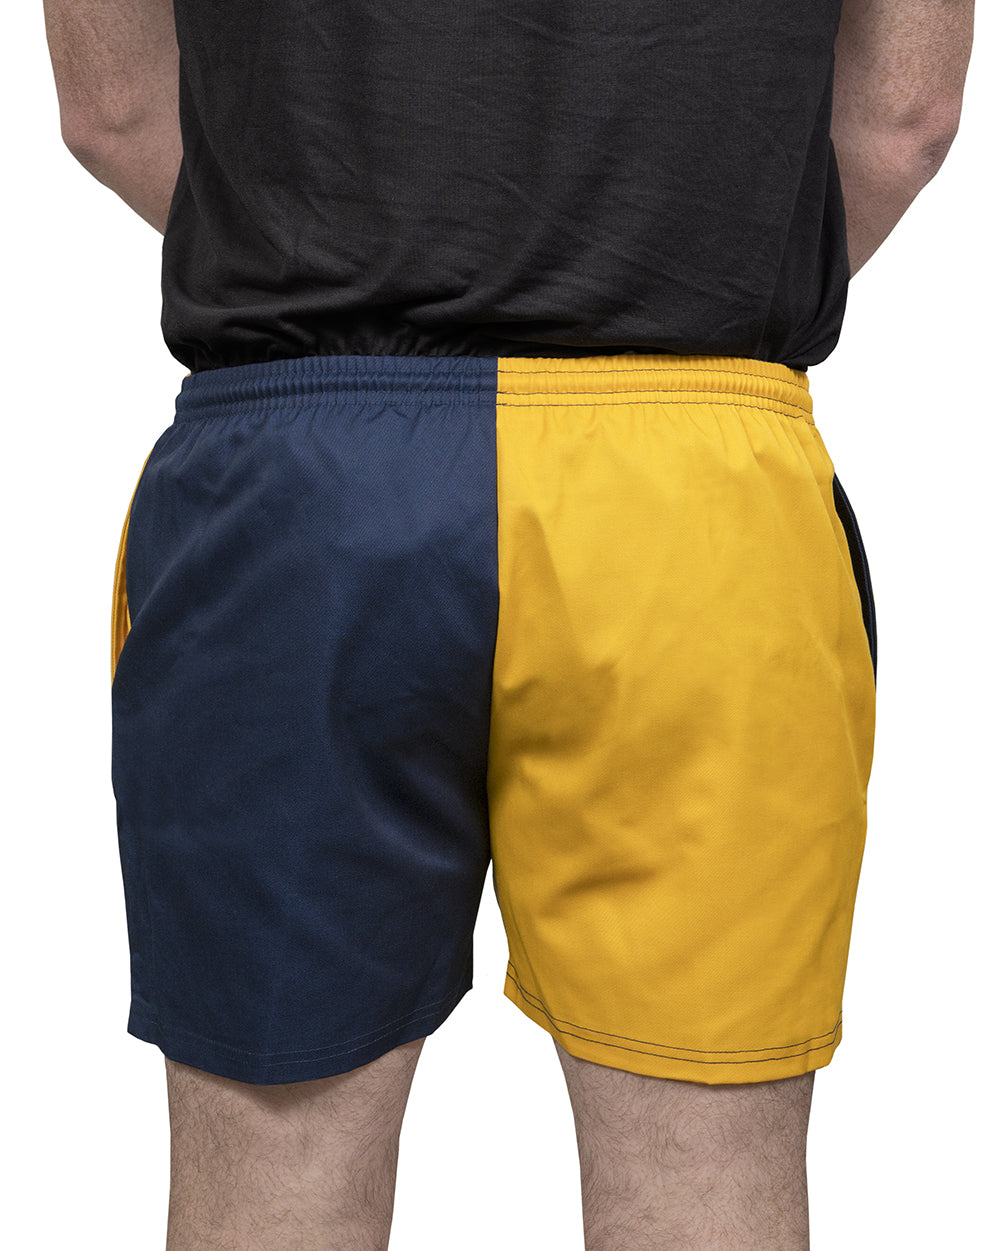 Speight's Retro Harlequin Rugby Shorts -  Beer Gear Apparel & Merchandise - speights - lion red - vb - tokyo dry merch